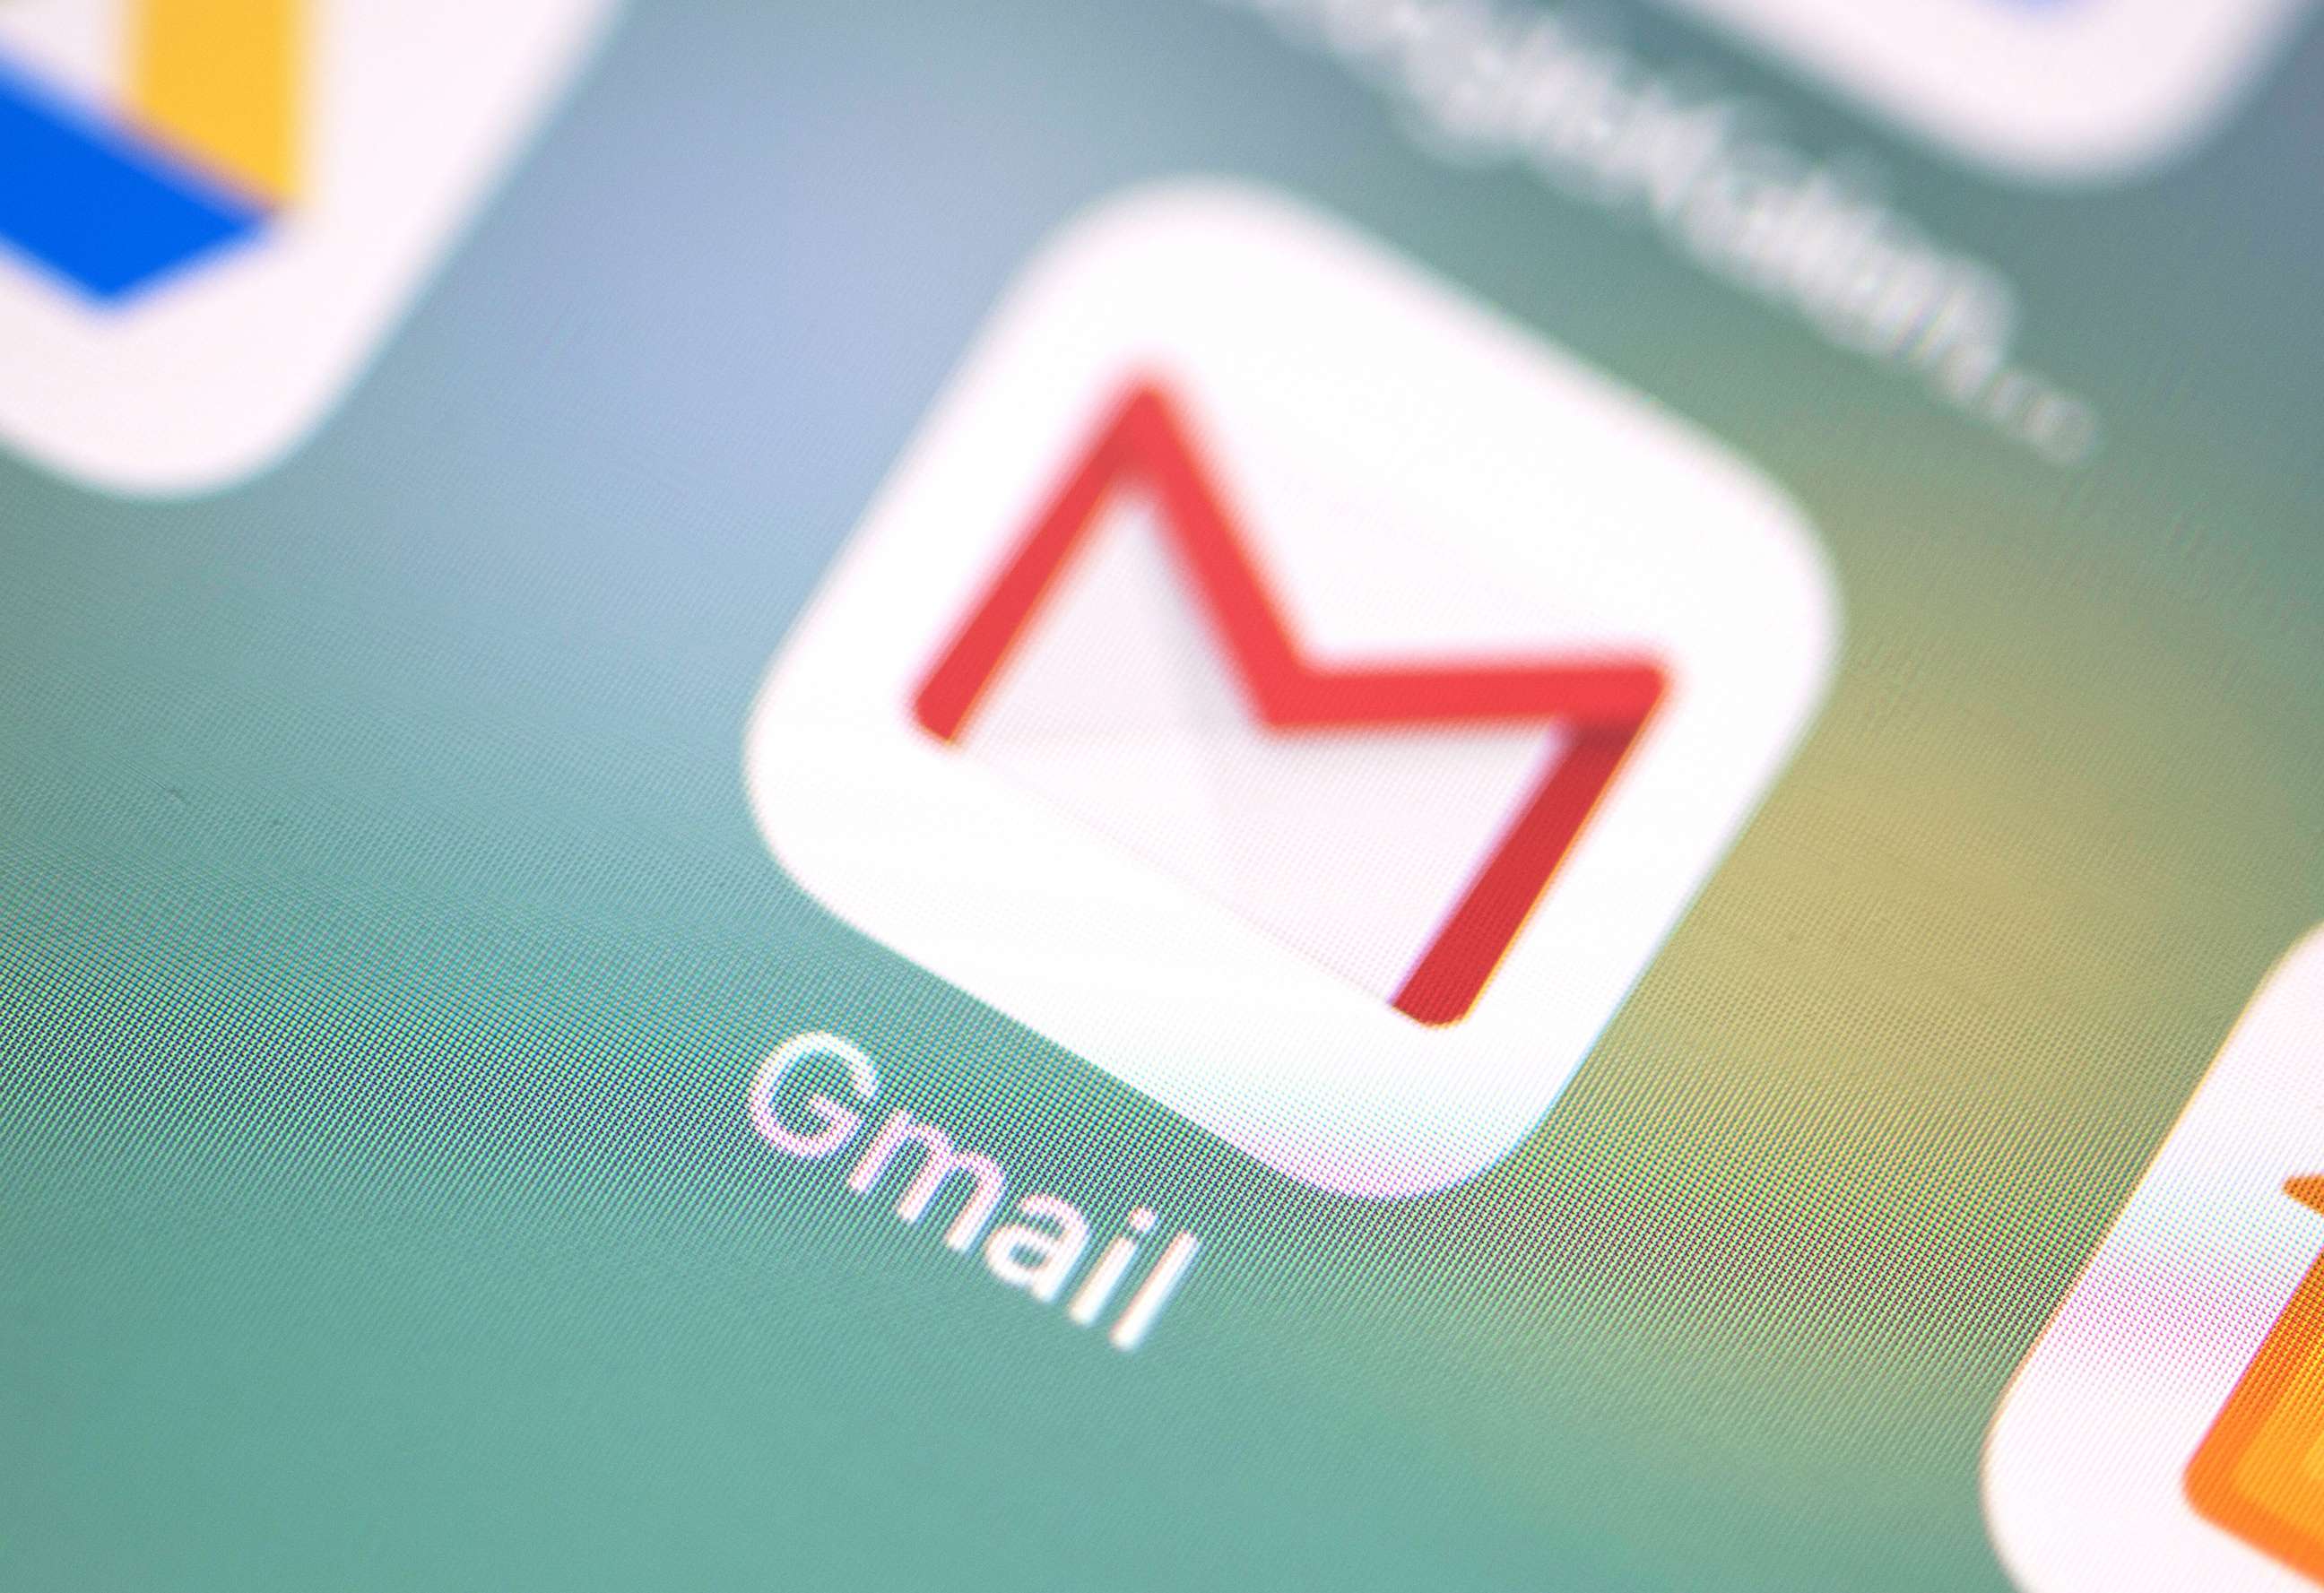 PHOTO: The logo of the Gmail application can be seen on the screen of an iPhone. 